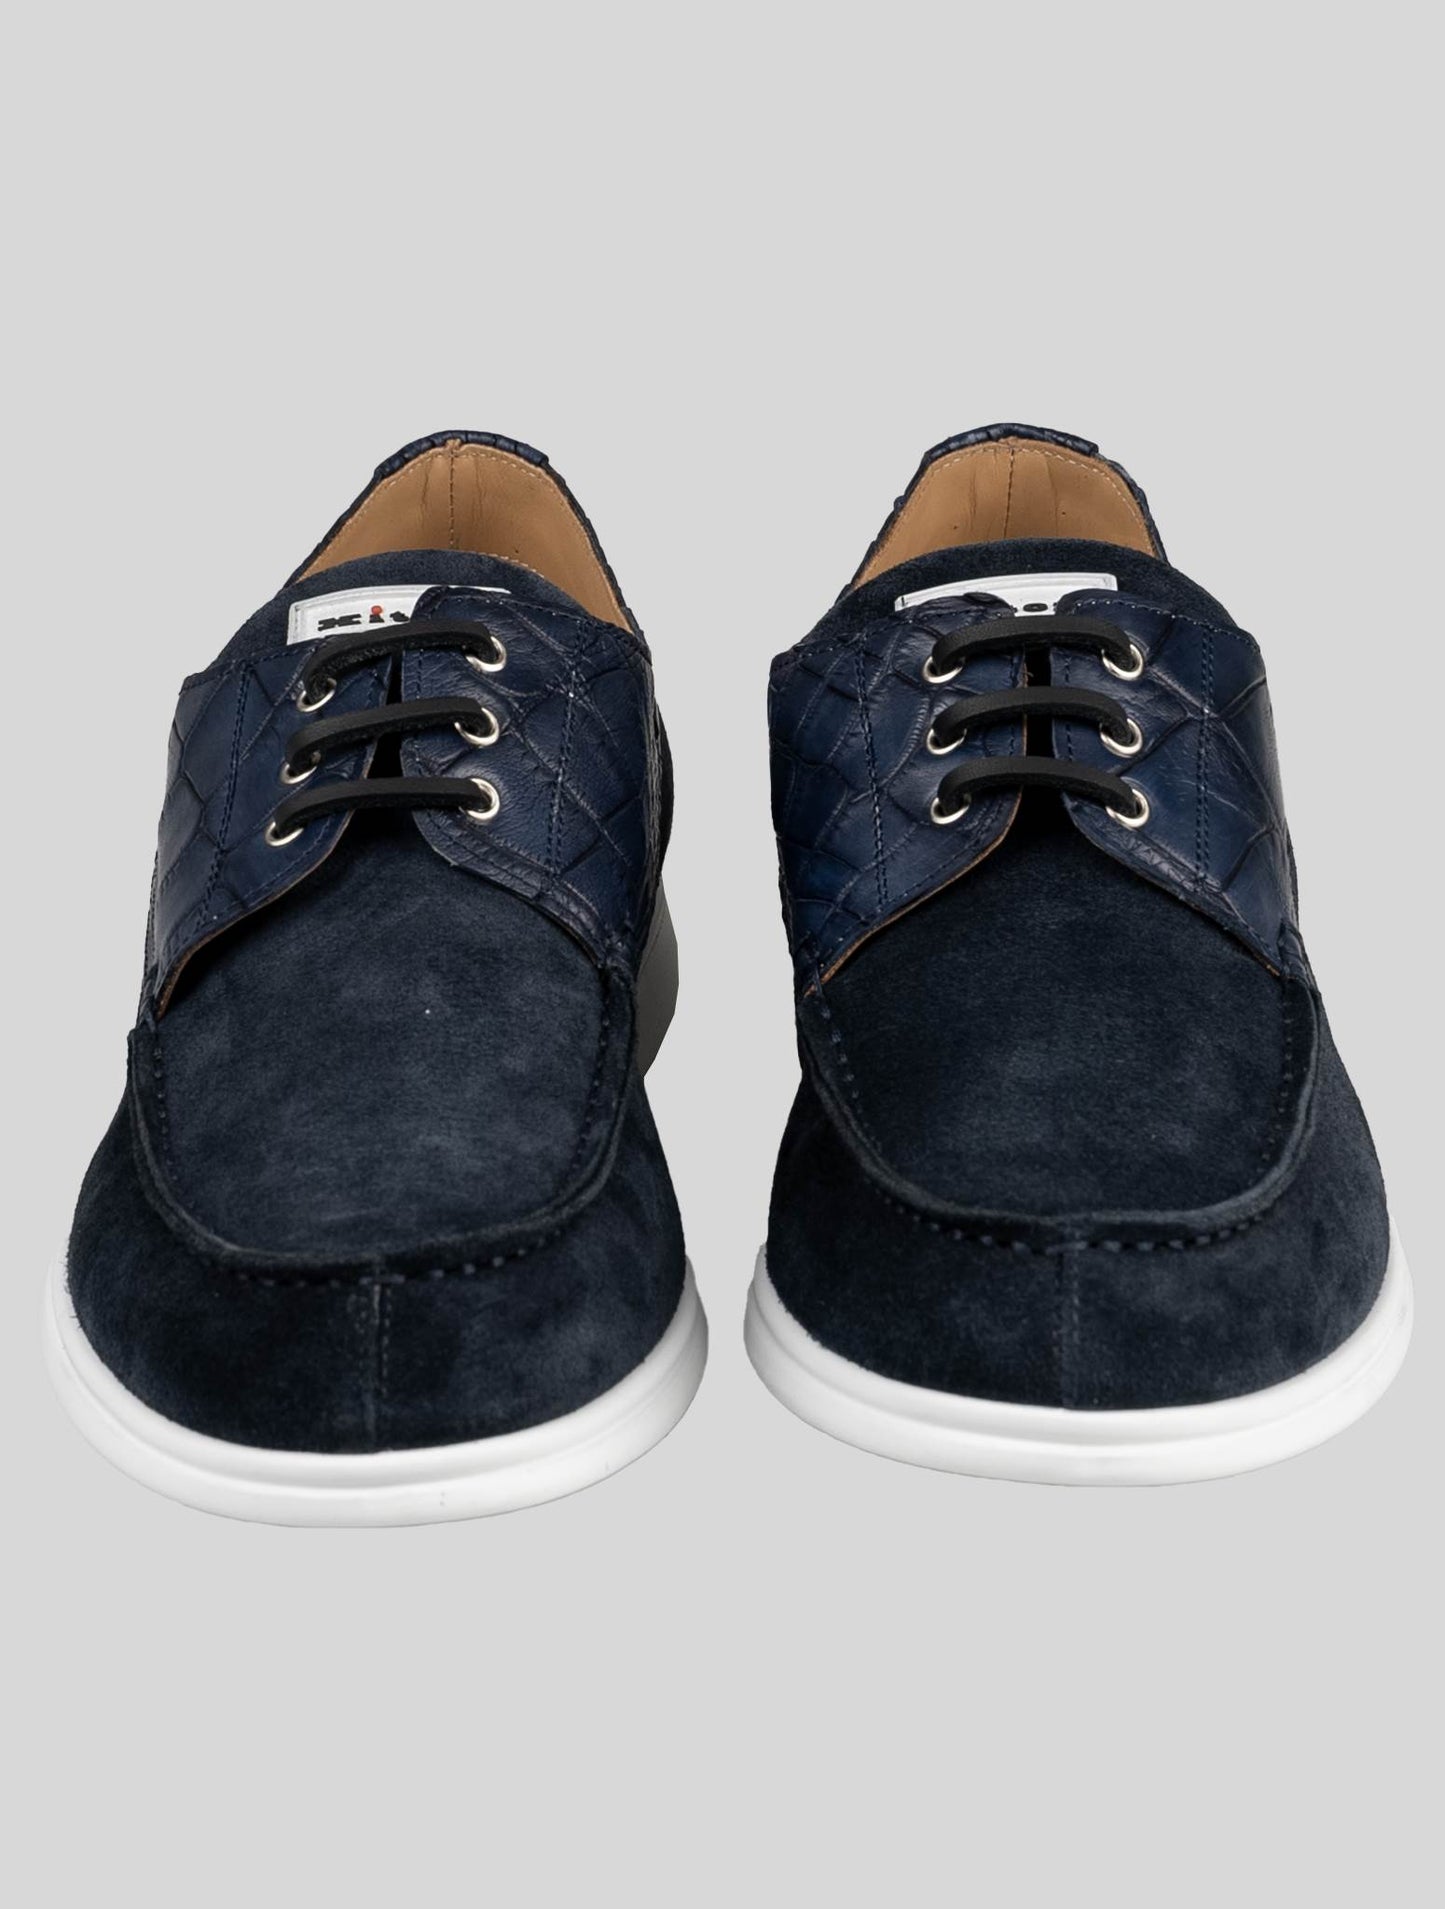 Kiton Blue Leather Suede Leather Crocodie Sneakers Shoes